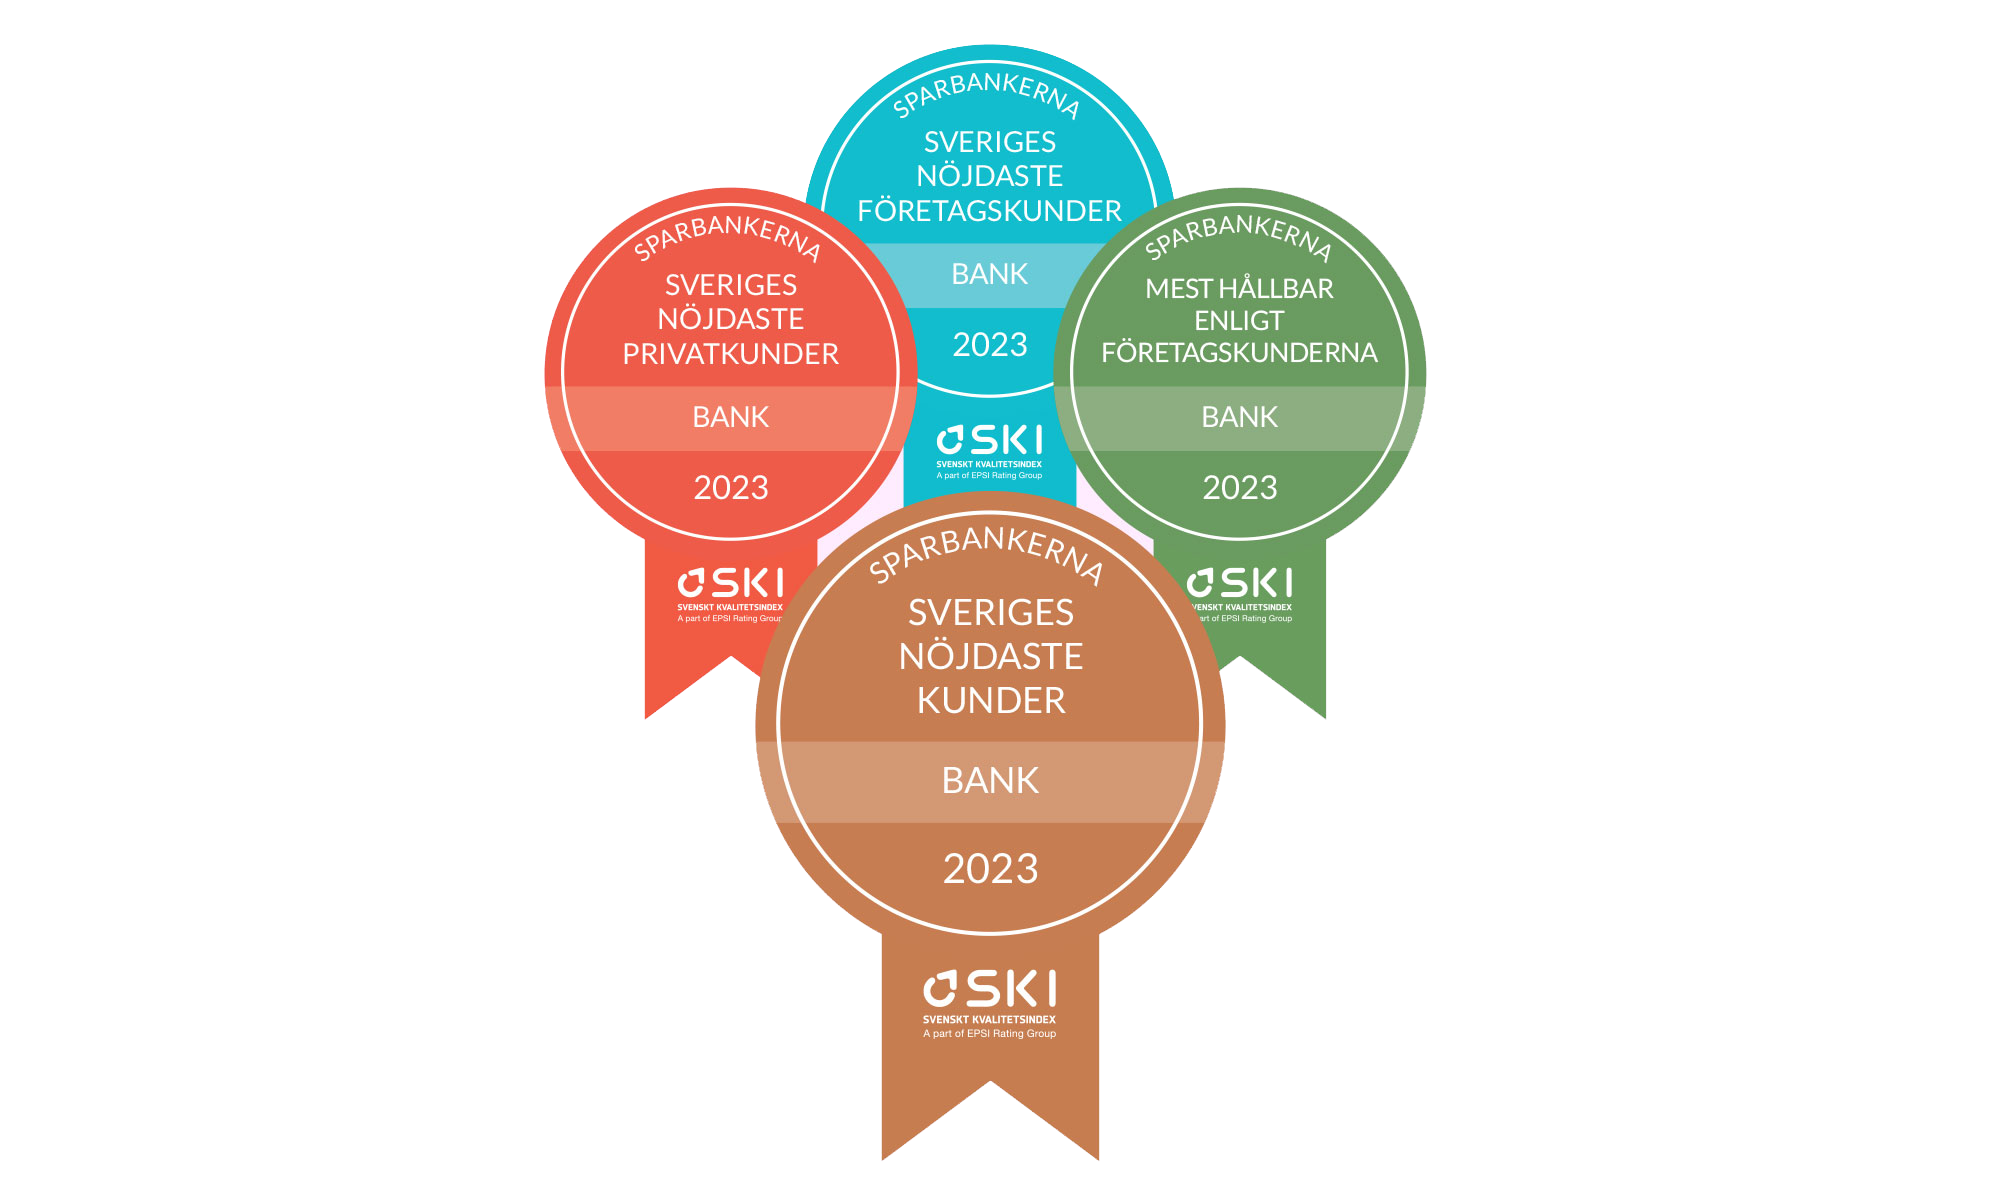 Medals for most satisfied customers in banking for 2023